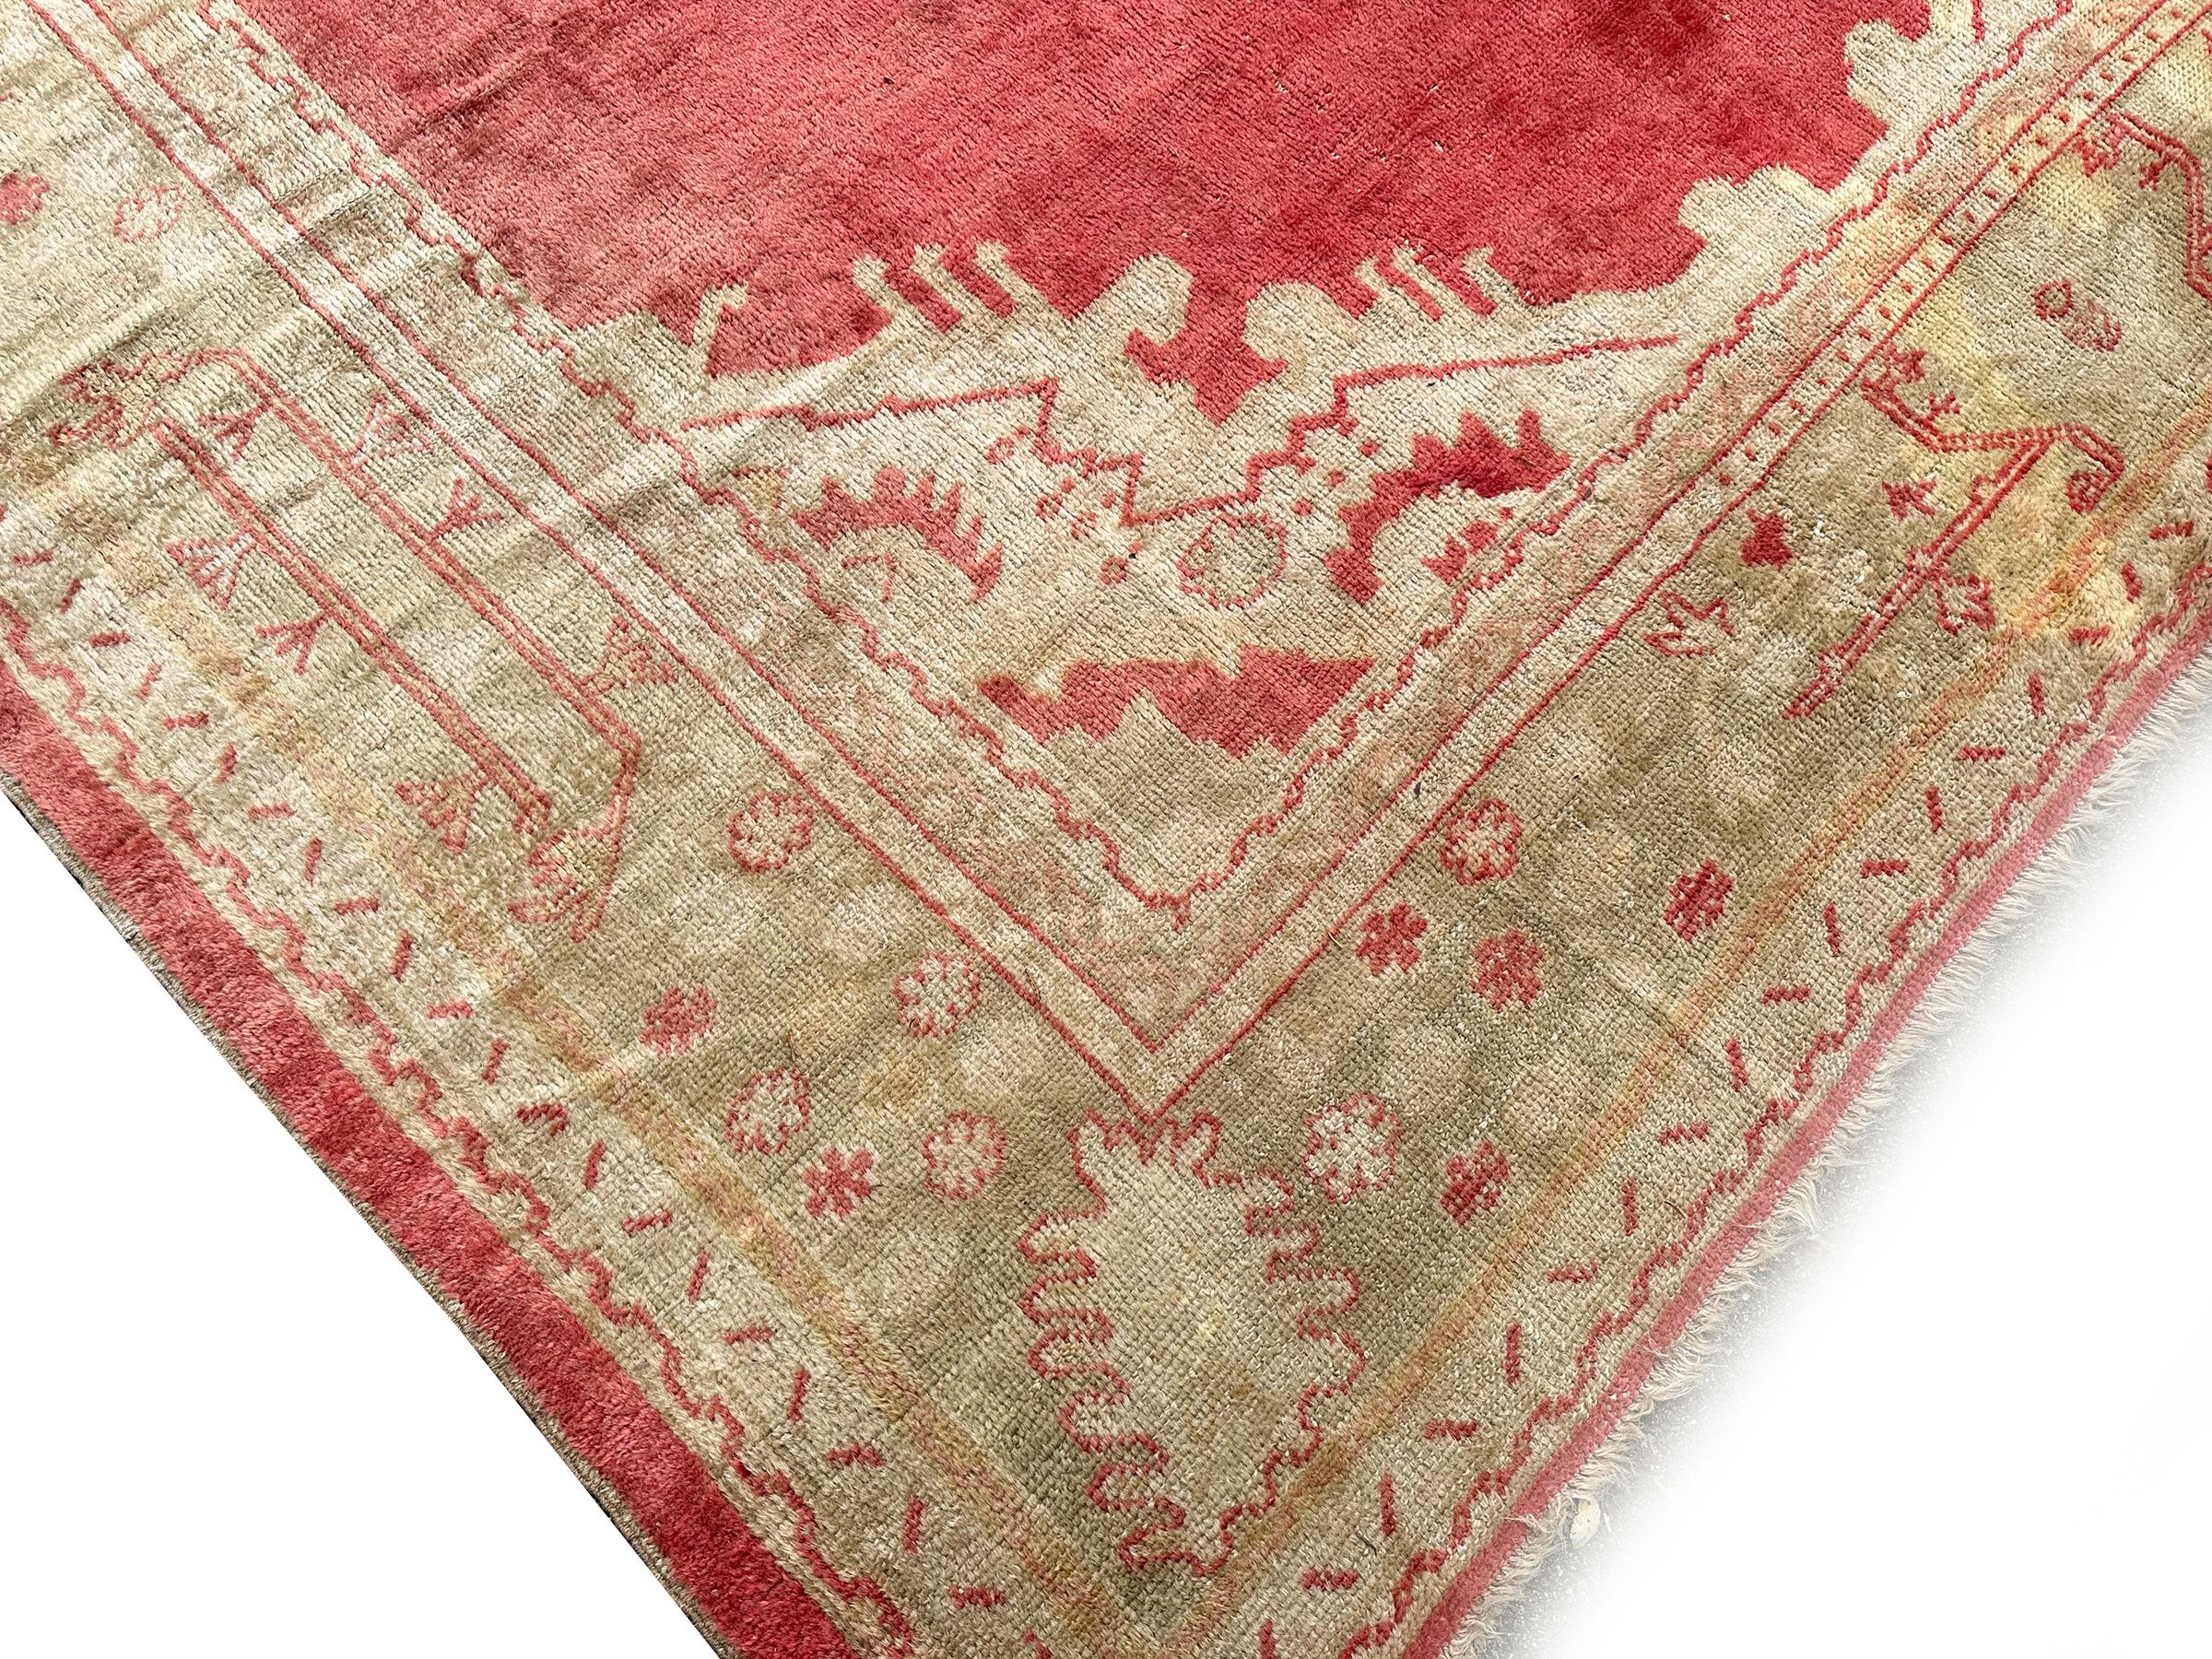 Authentic Antique Oushak Oversized Wool Foundation 1900 10x18 Handmade 305x549cm For Sale 5